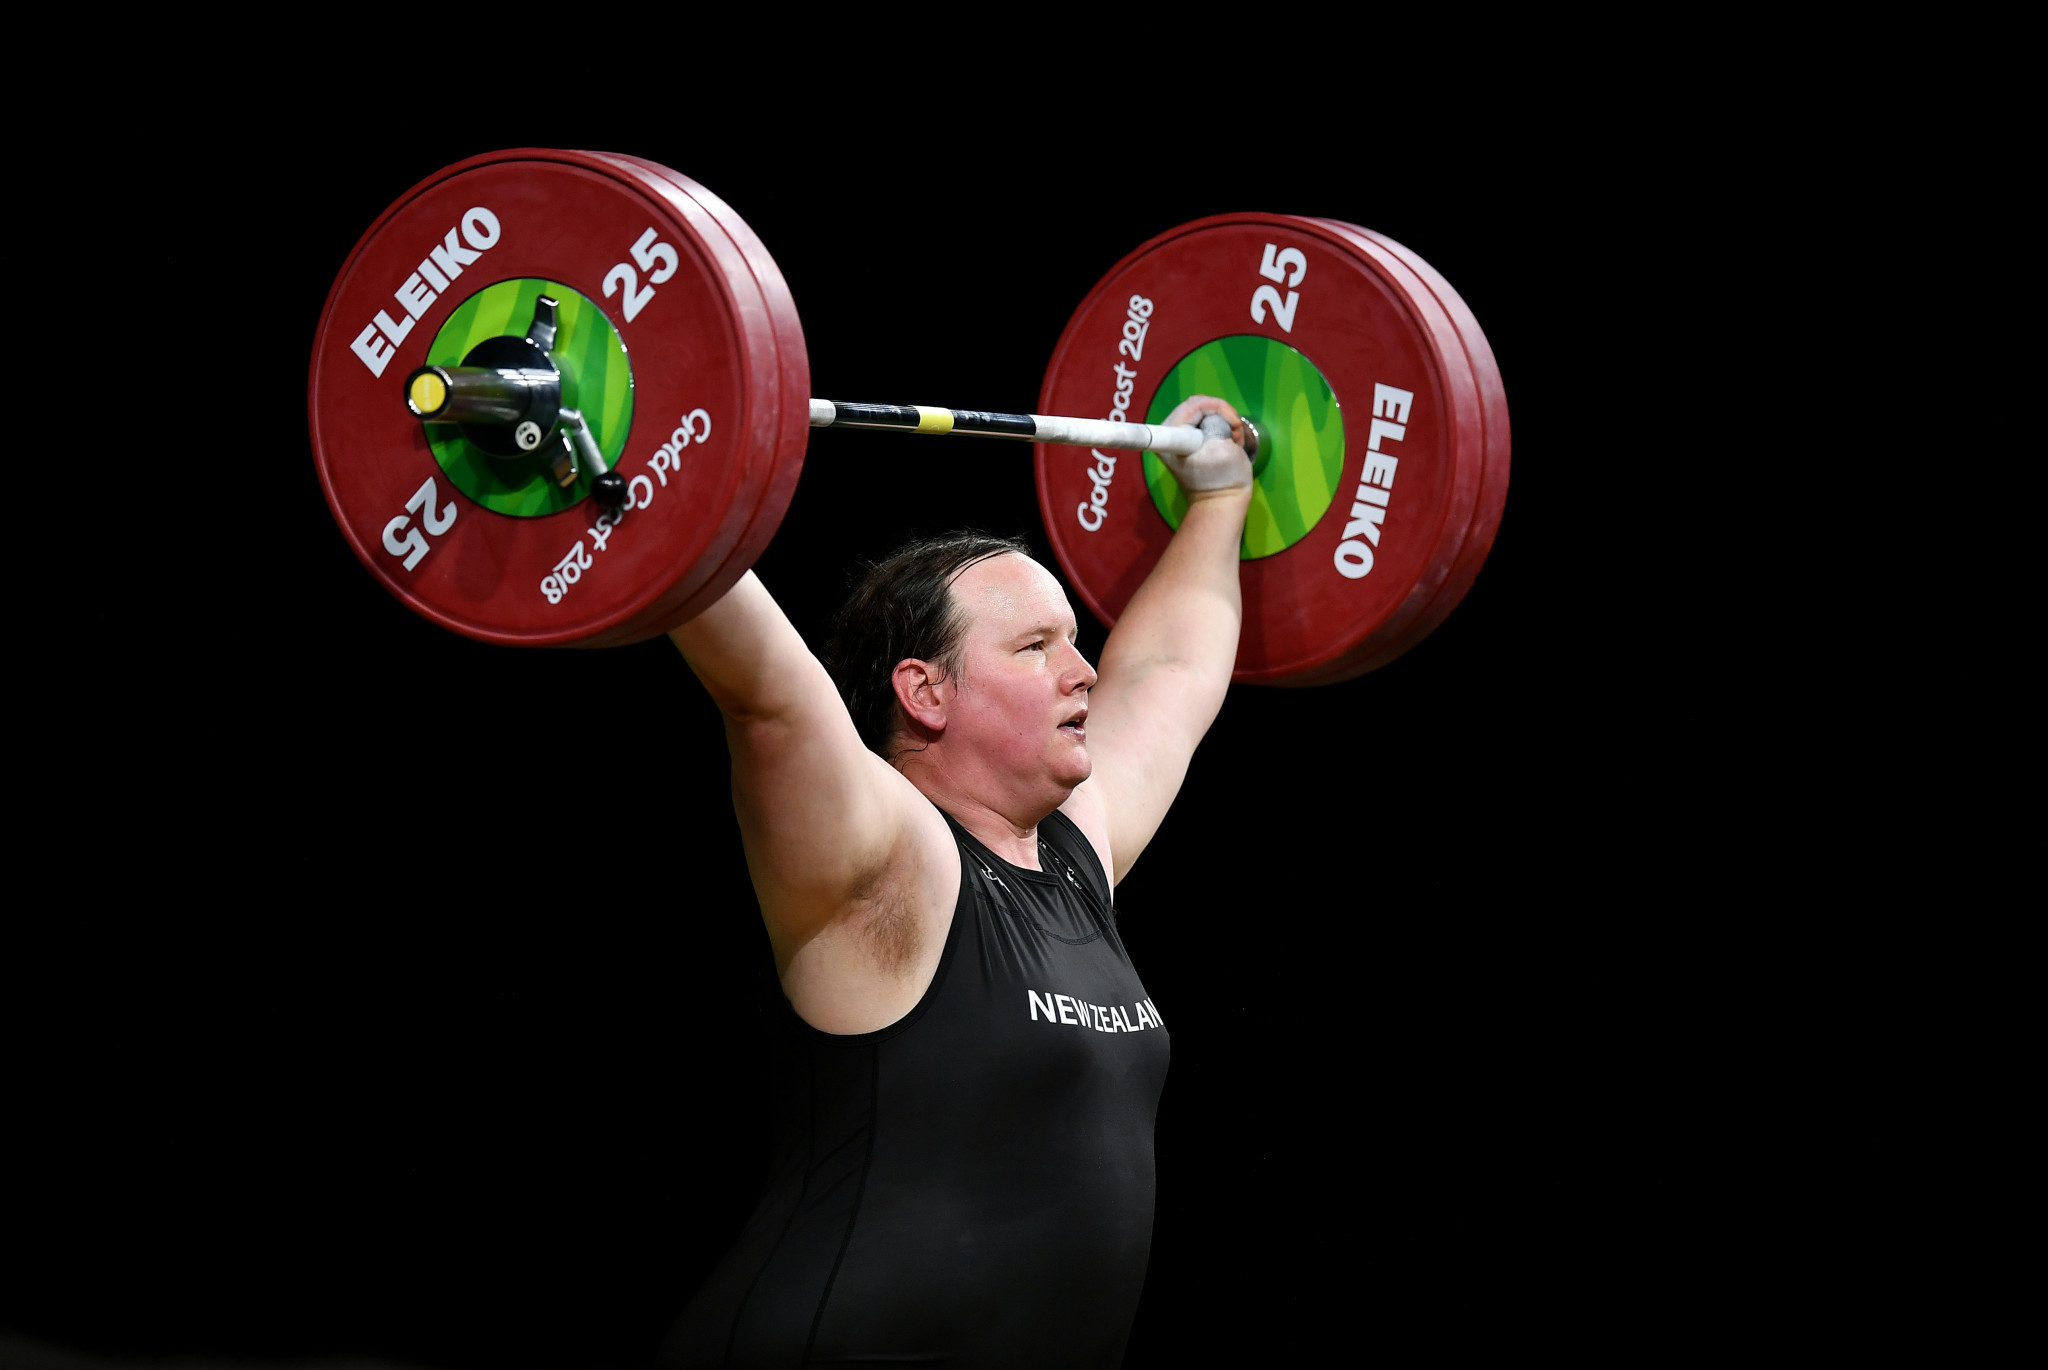 Laurel Hubbard has qualified for the Olympics and could be a medal contender in the women's super-heavyweight category ©Getty Images